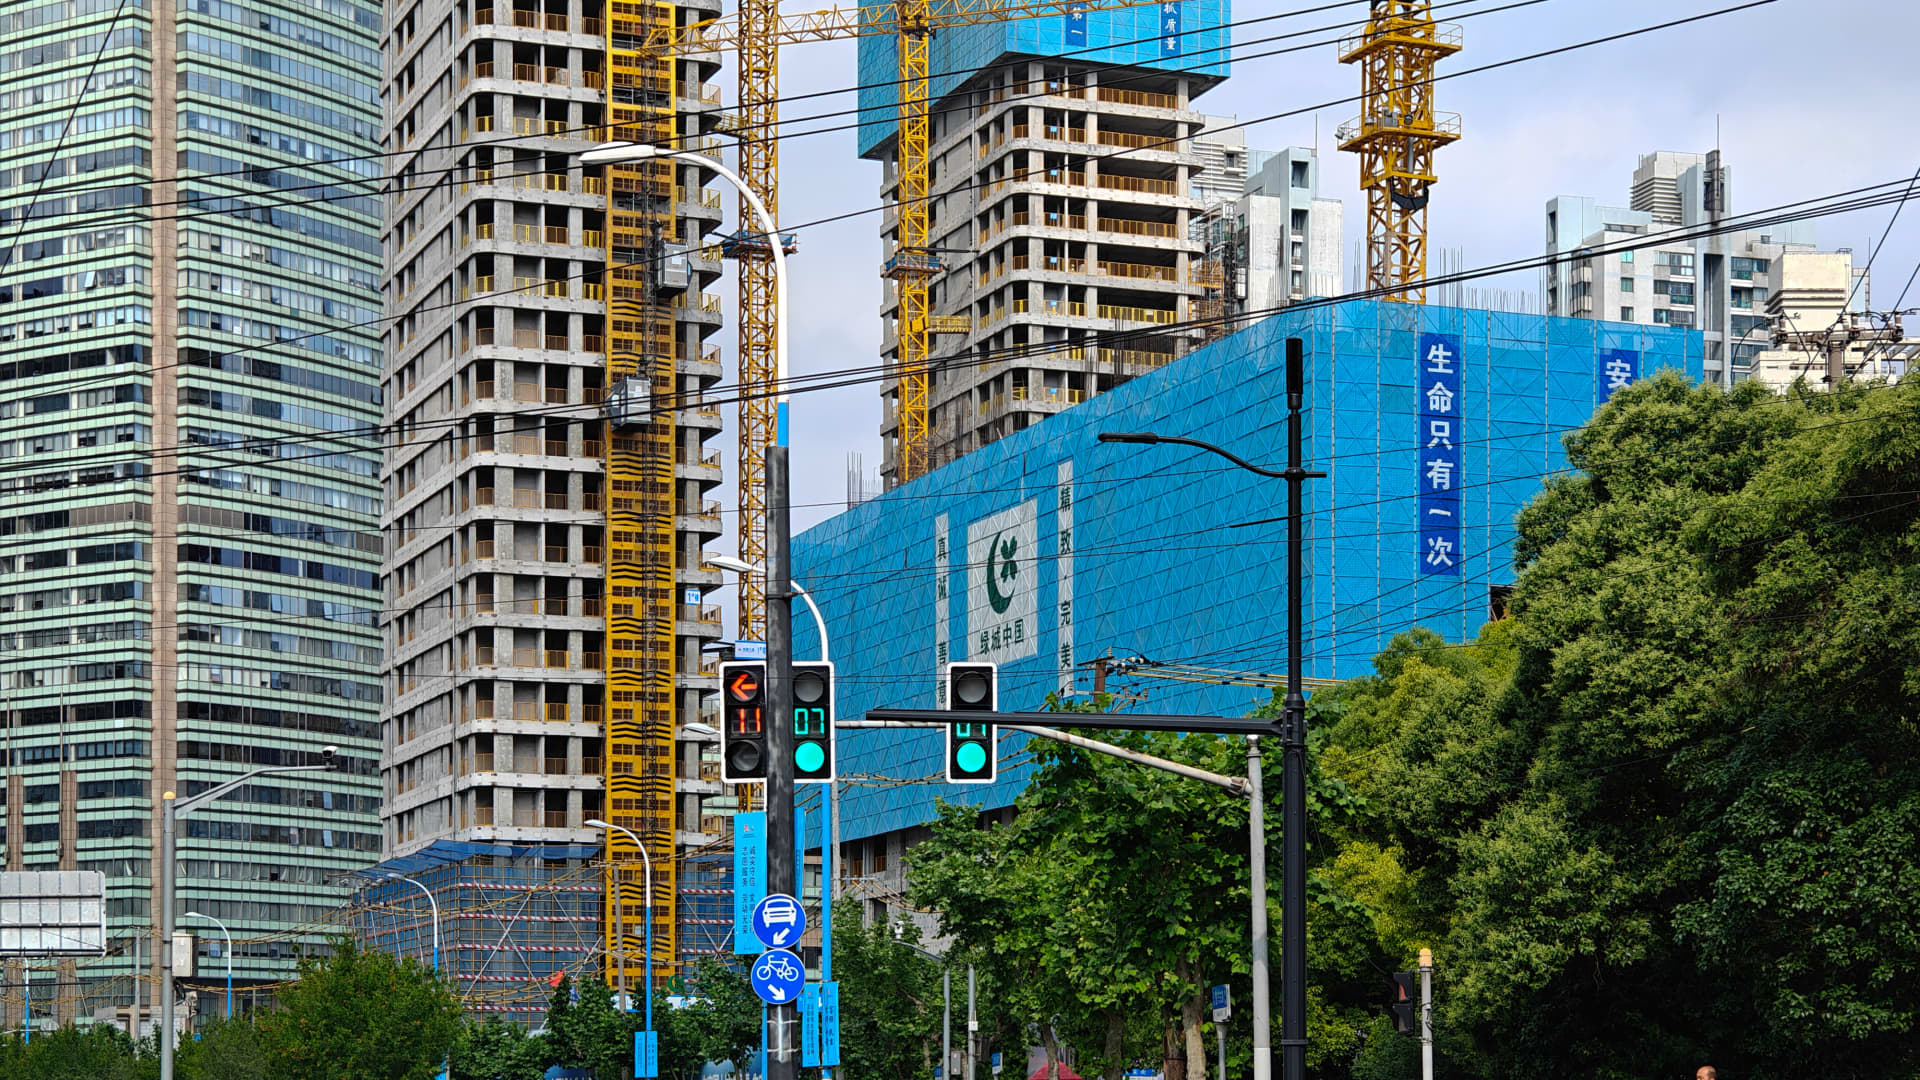 New warning signs are emerging for the Chinese real estate market